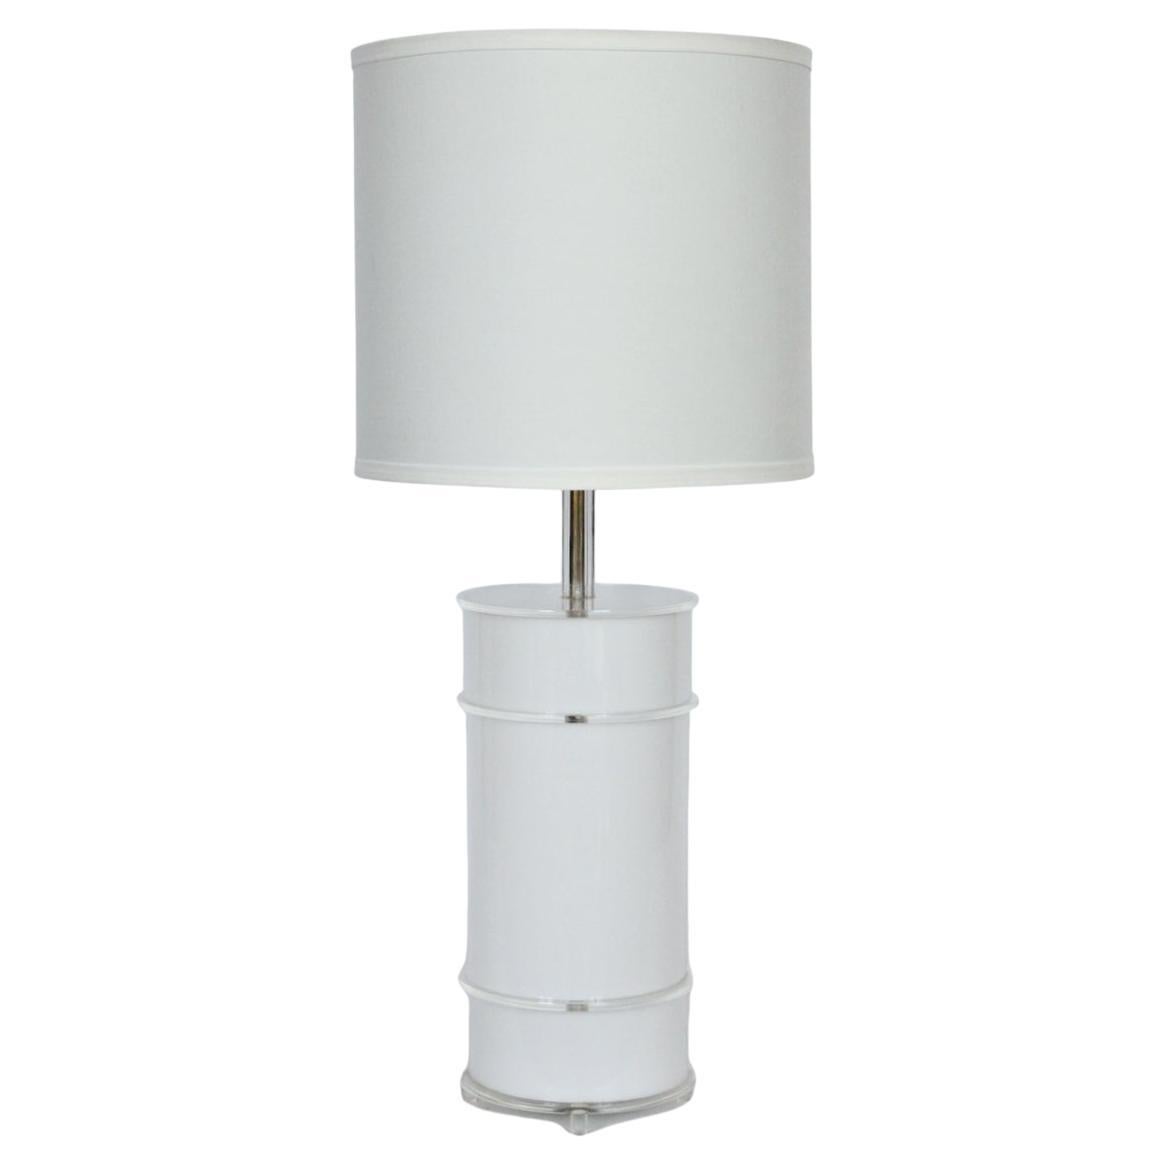 Neal Small Style White Lucite Table Lamp with Clear Lucite Detail, 1970s